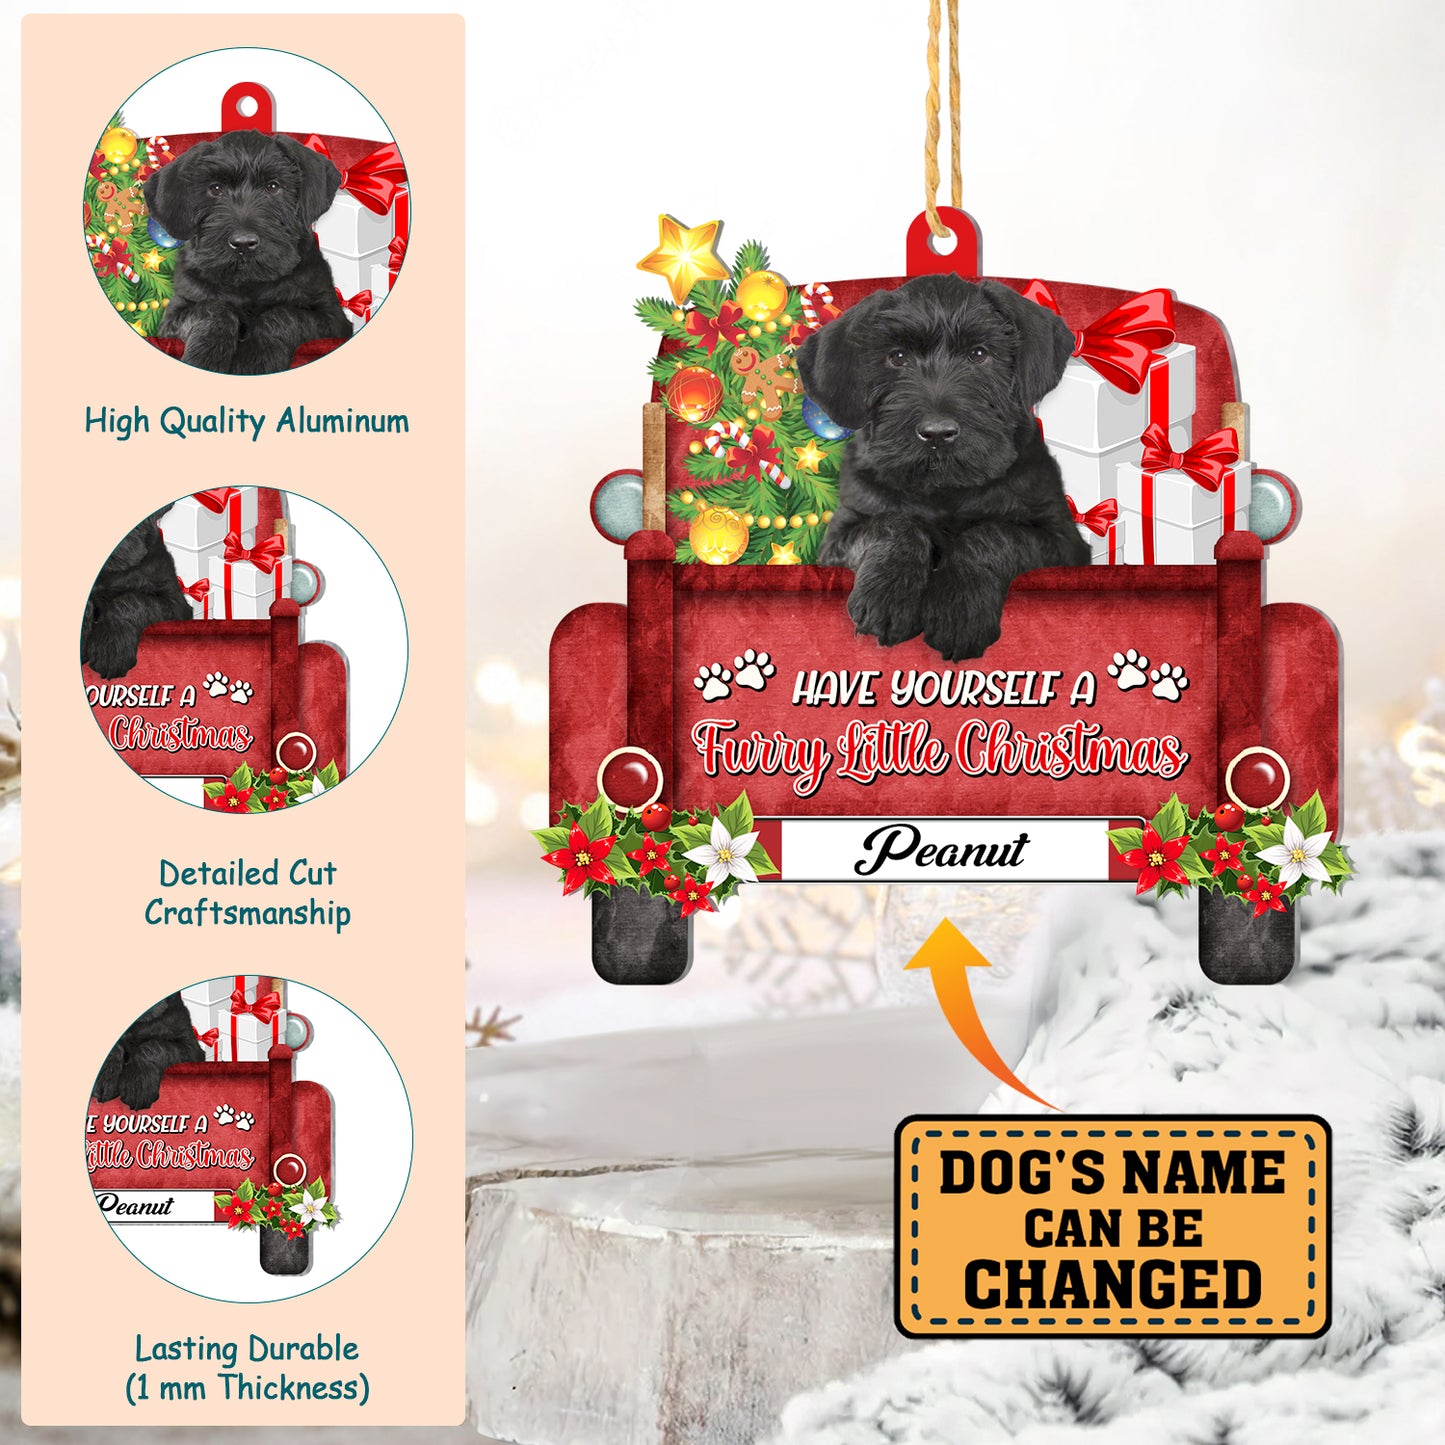 Personalized Giant Schnauzer Red Truck Christmas Aluminum Ornament